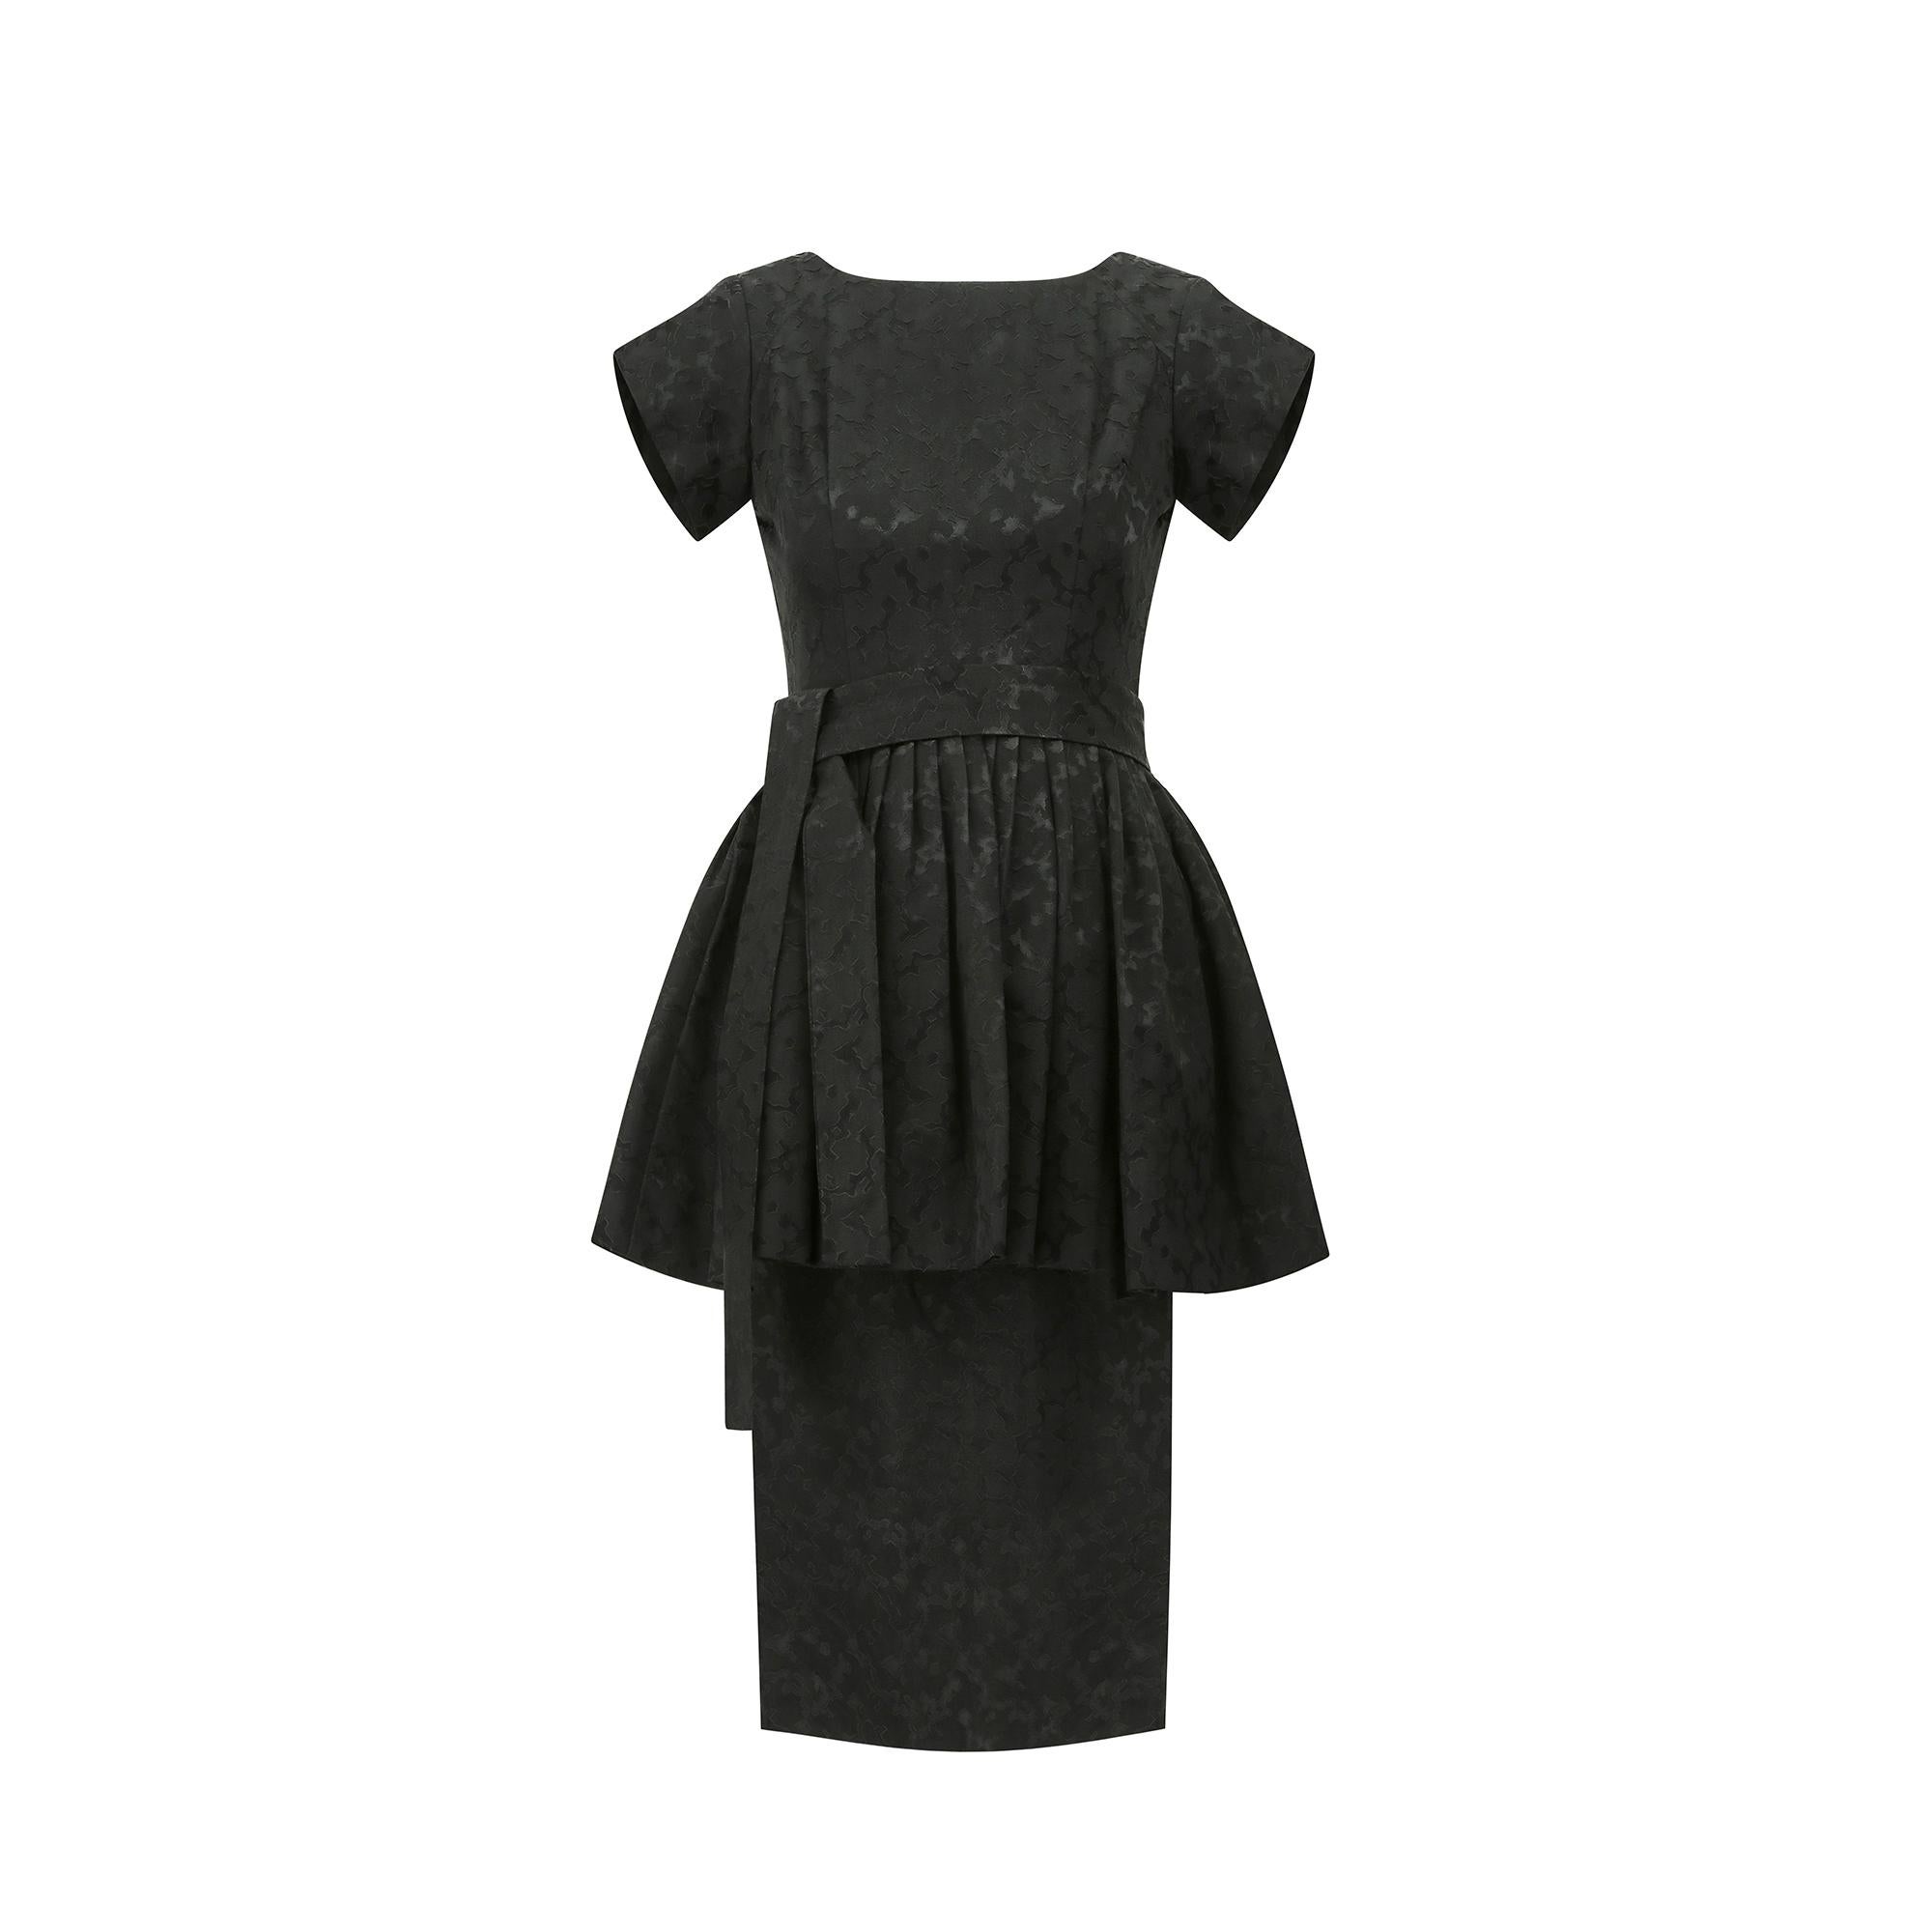 A timeless 1950s shape, this short-sleeve little black dress has a pencil skirt and a cinched waist and tie belt to accentuate the female figure. The voluminous peplum overskirt is crafted from the same fabric and is lined with layers of tulle for